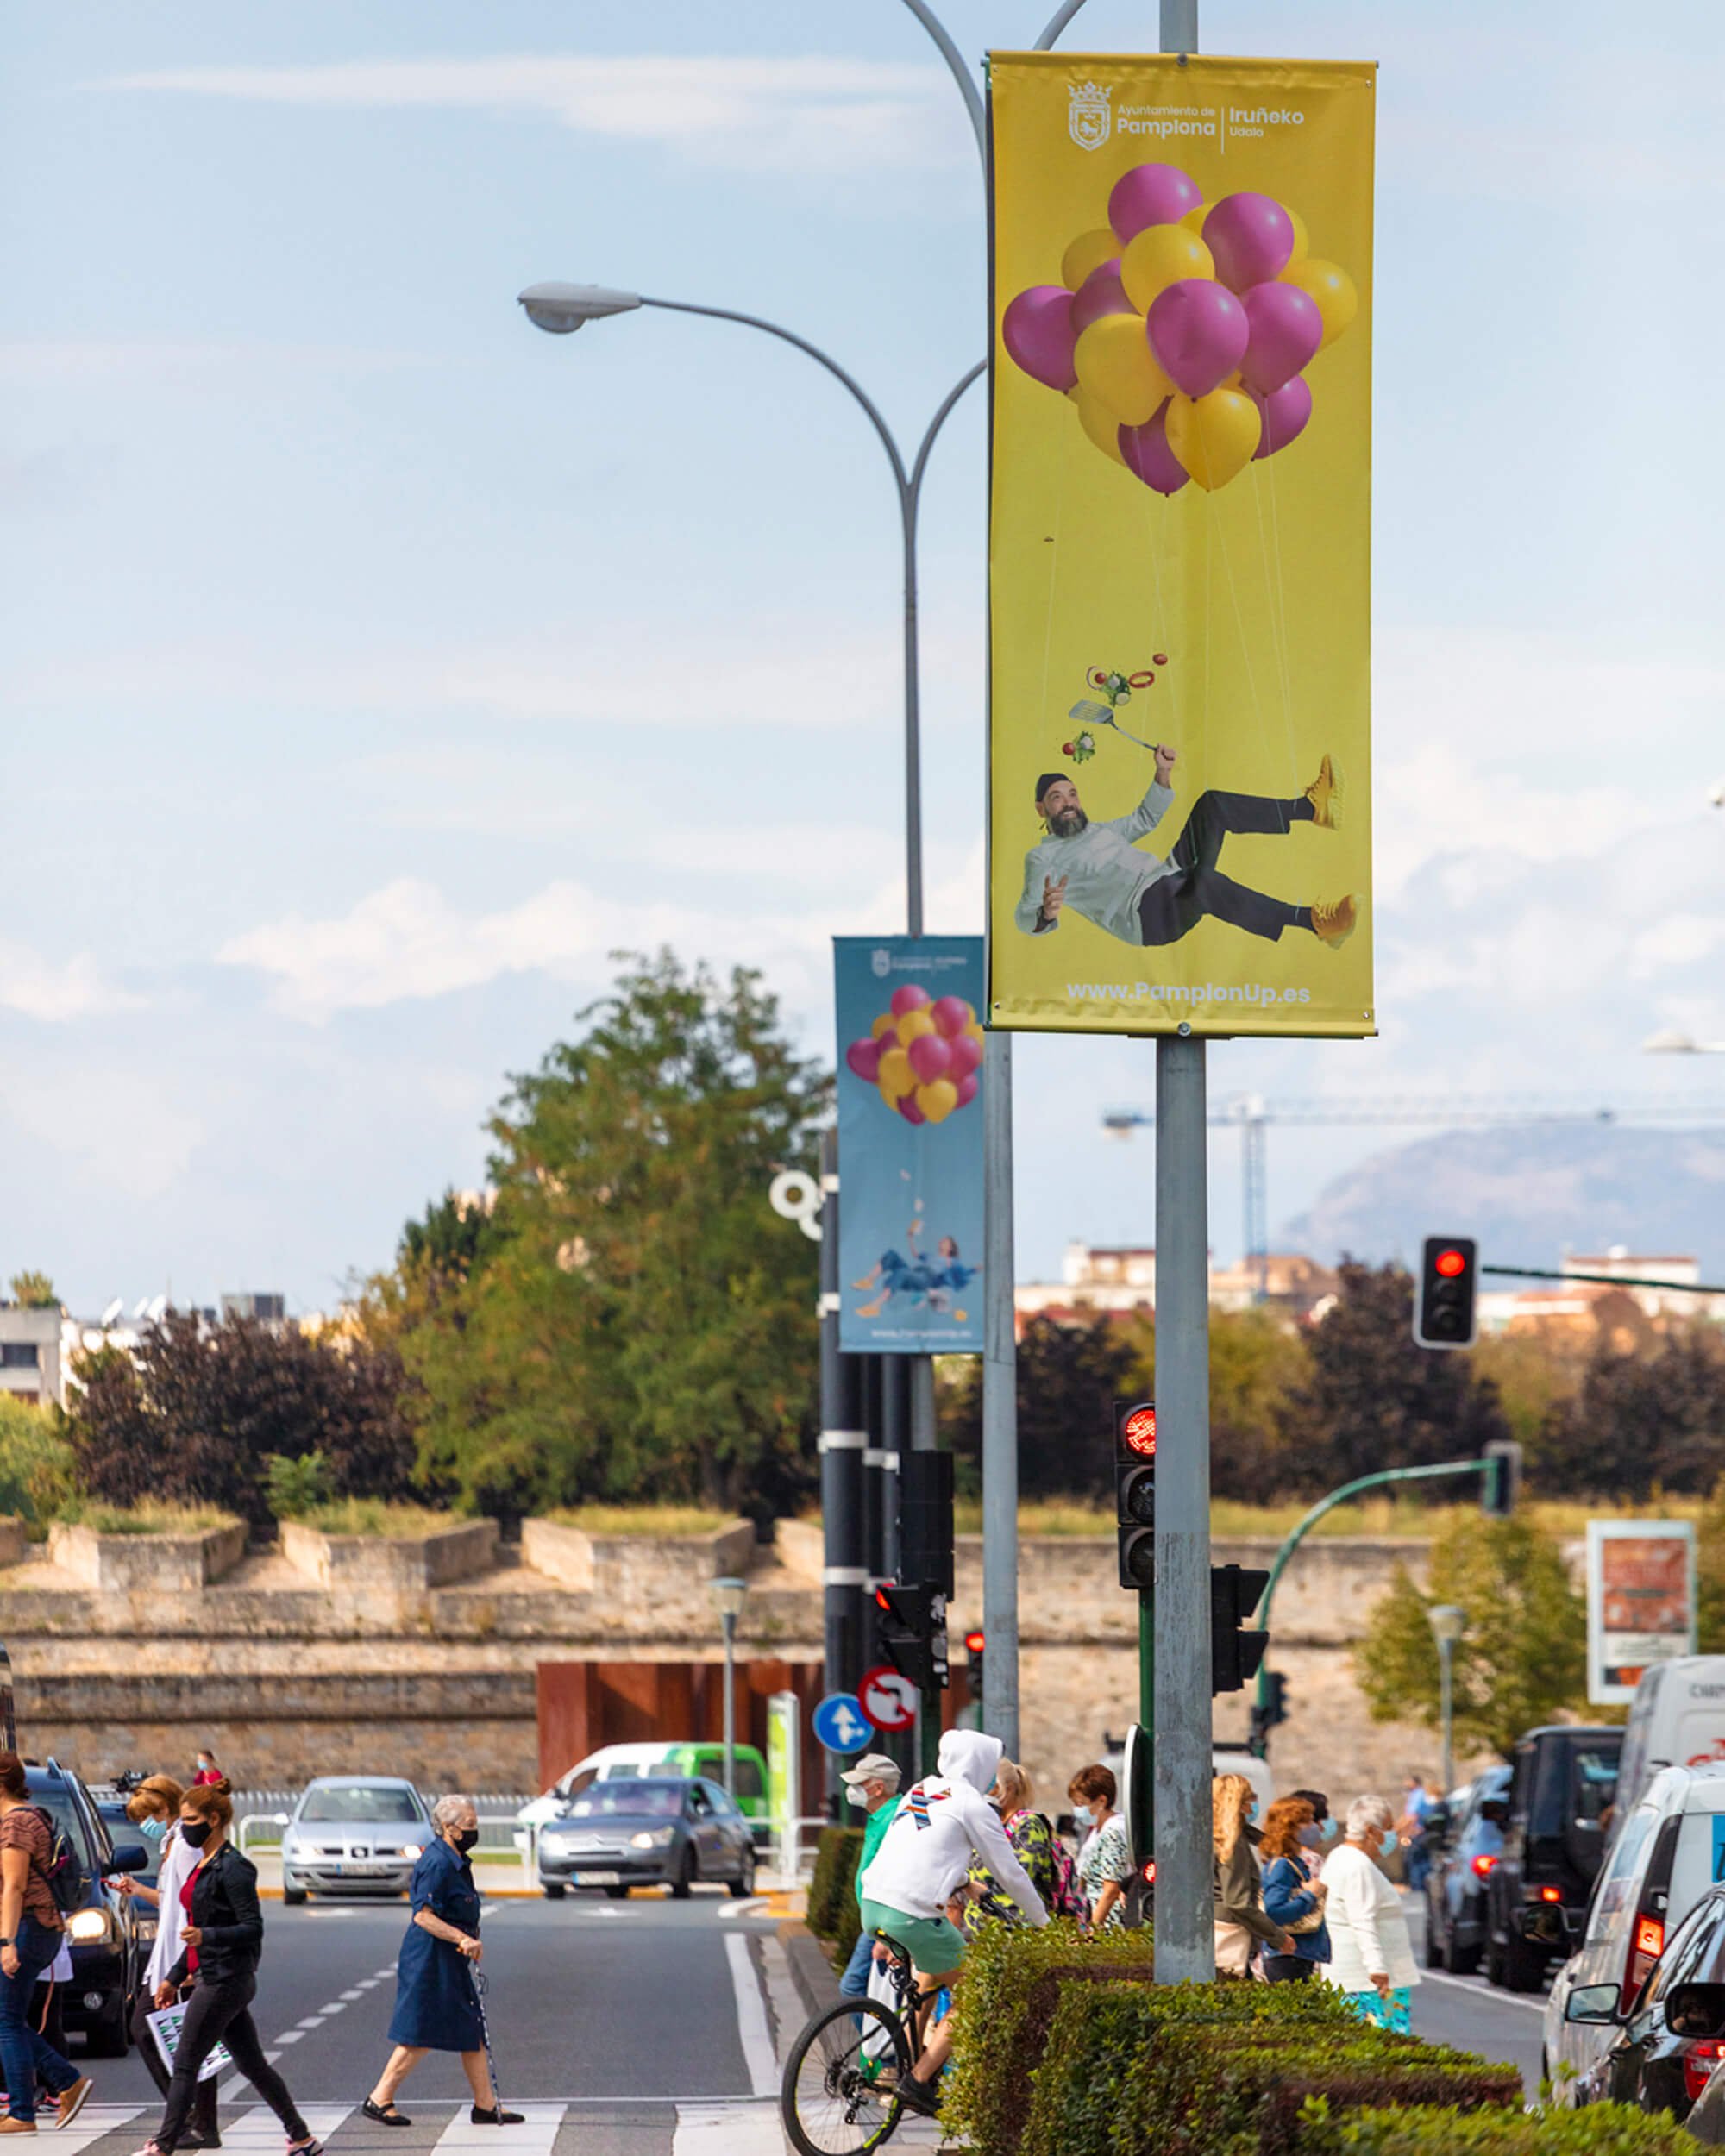 Flying with deals- PamplonUp campaign by MuruStudios advertising photographers in Madrid Barcelona Pamplona Spain 09.jpg